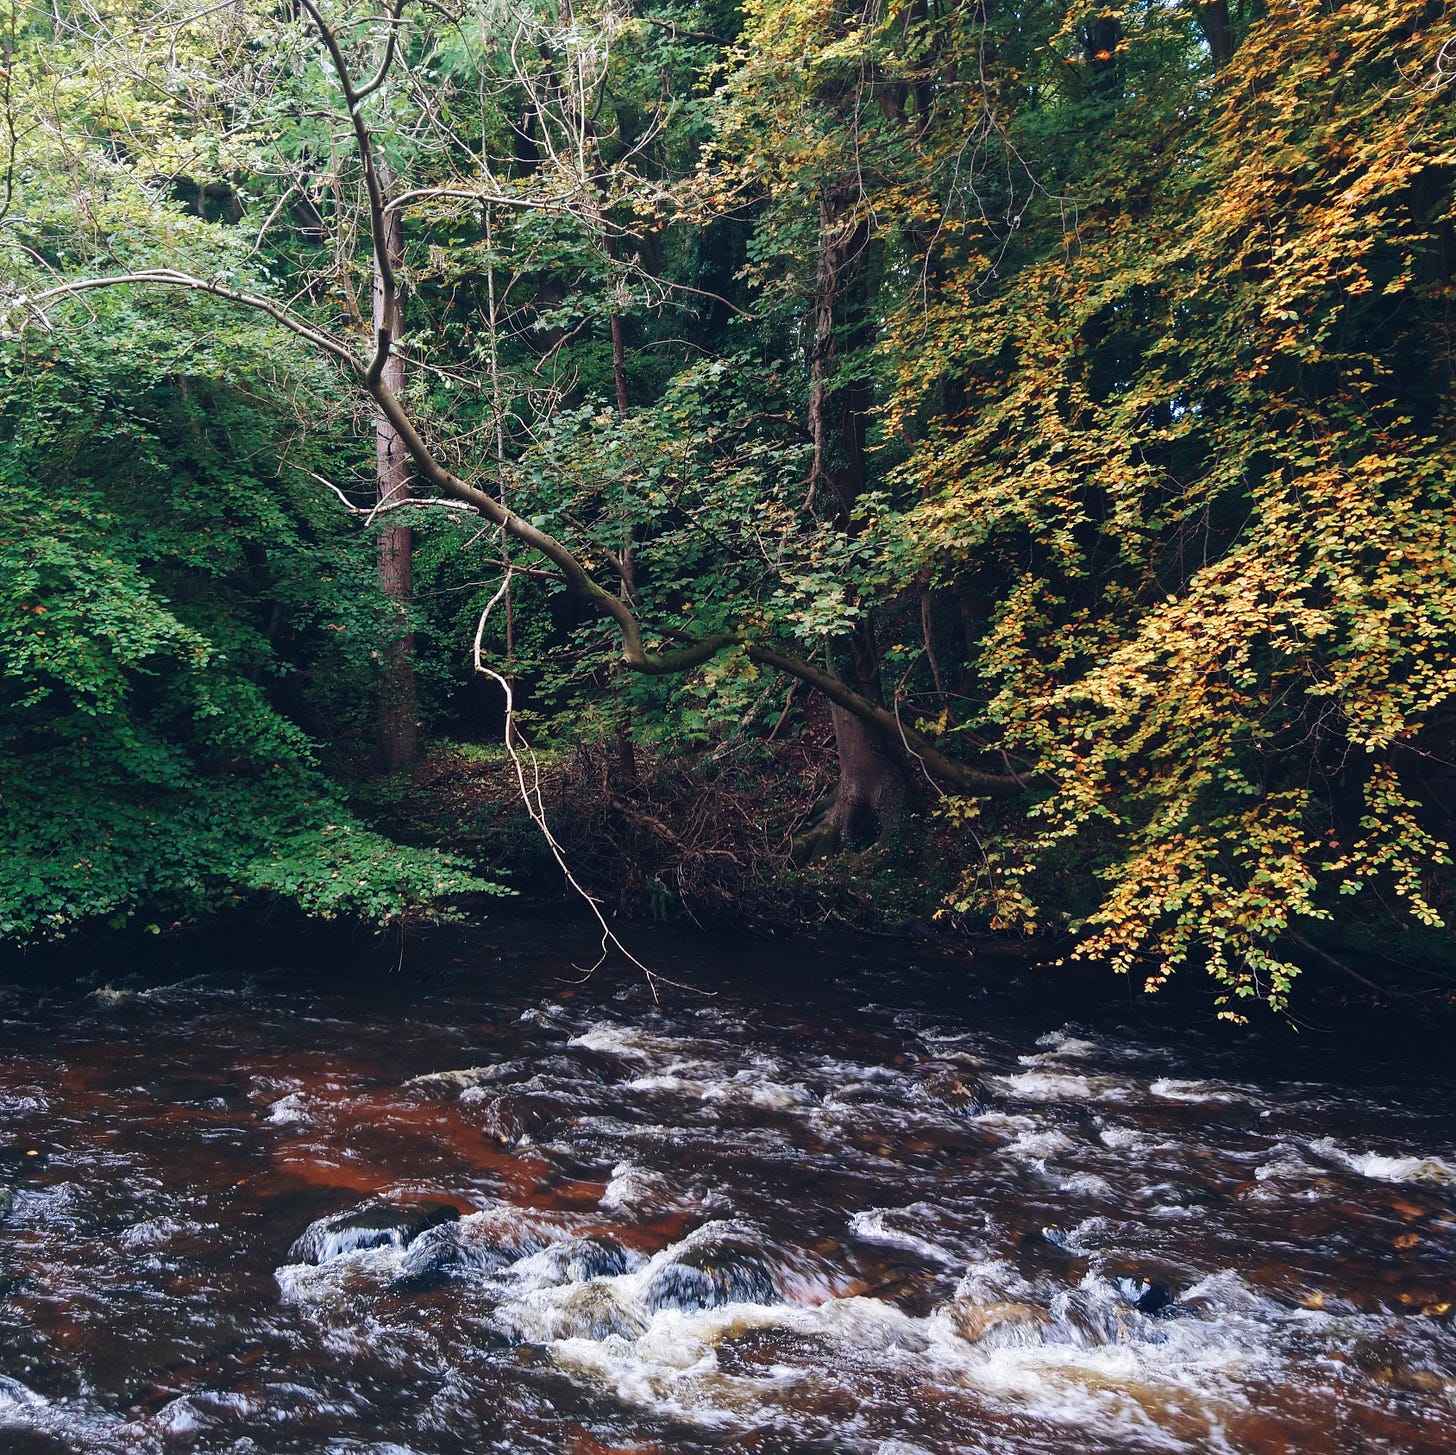 A photo of a fast brown river running beneath autumnal foliage